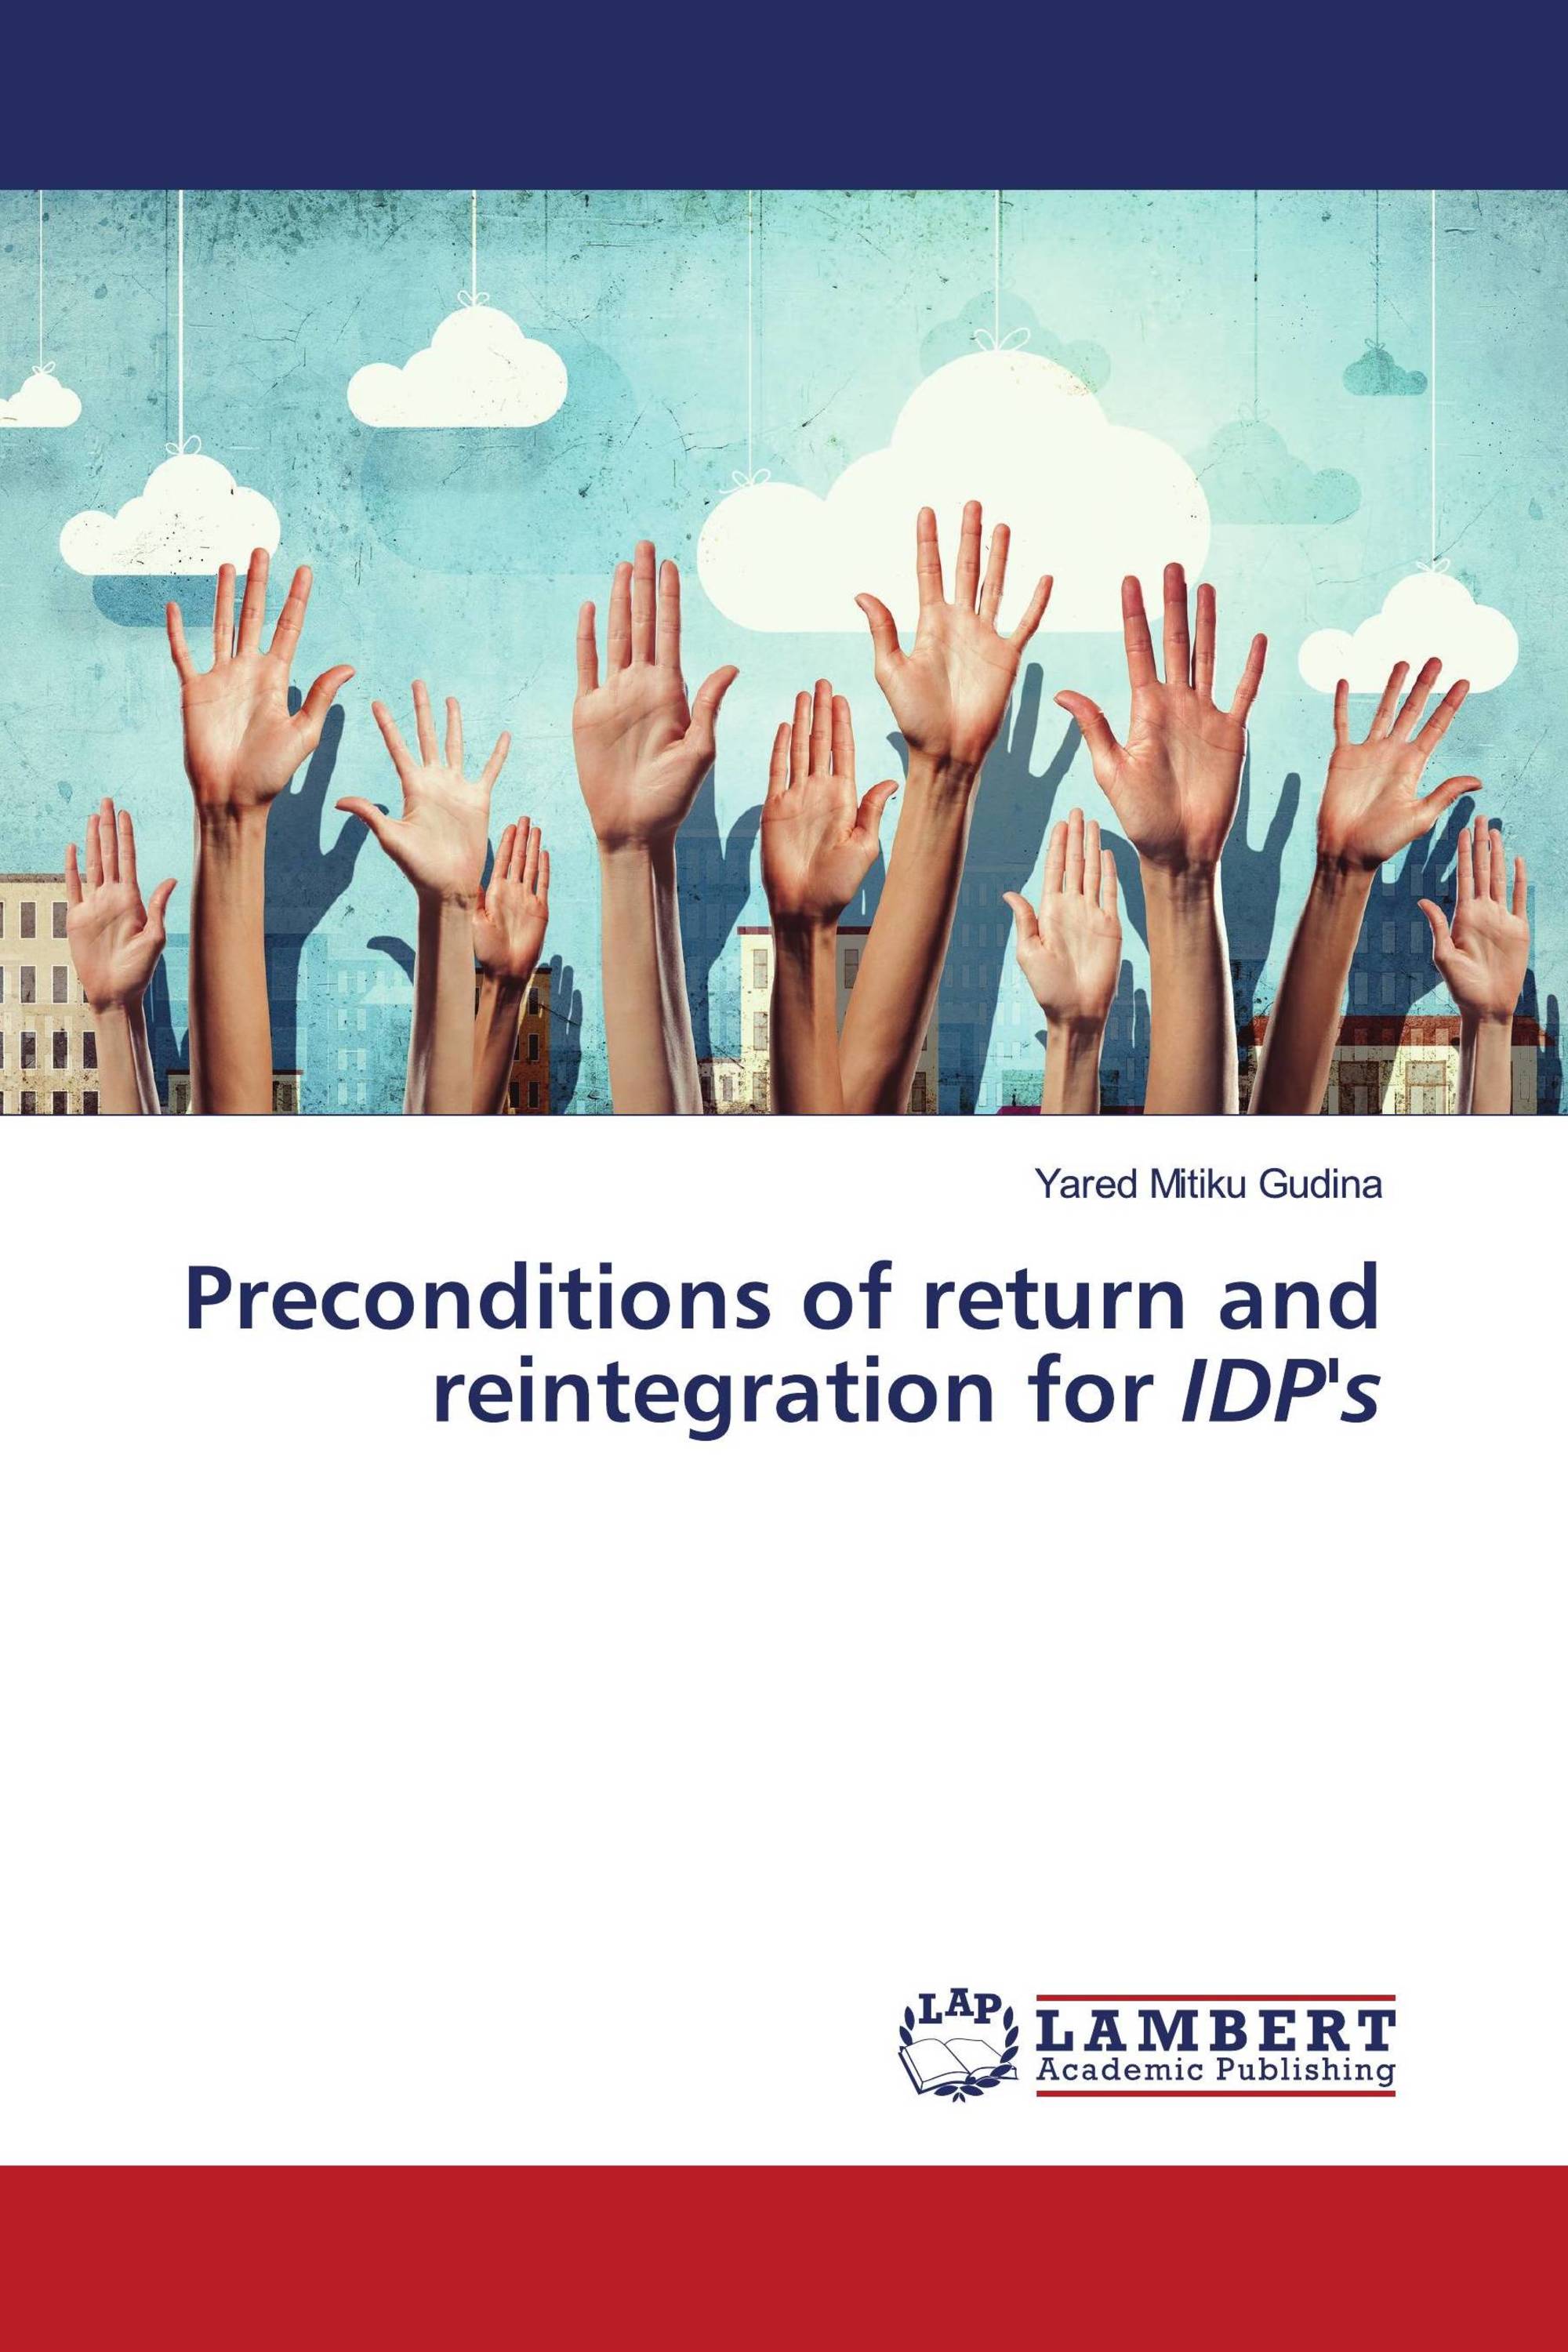 Preconditions of return and reintegration for IDP's